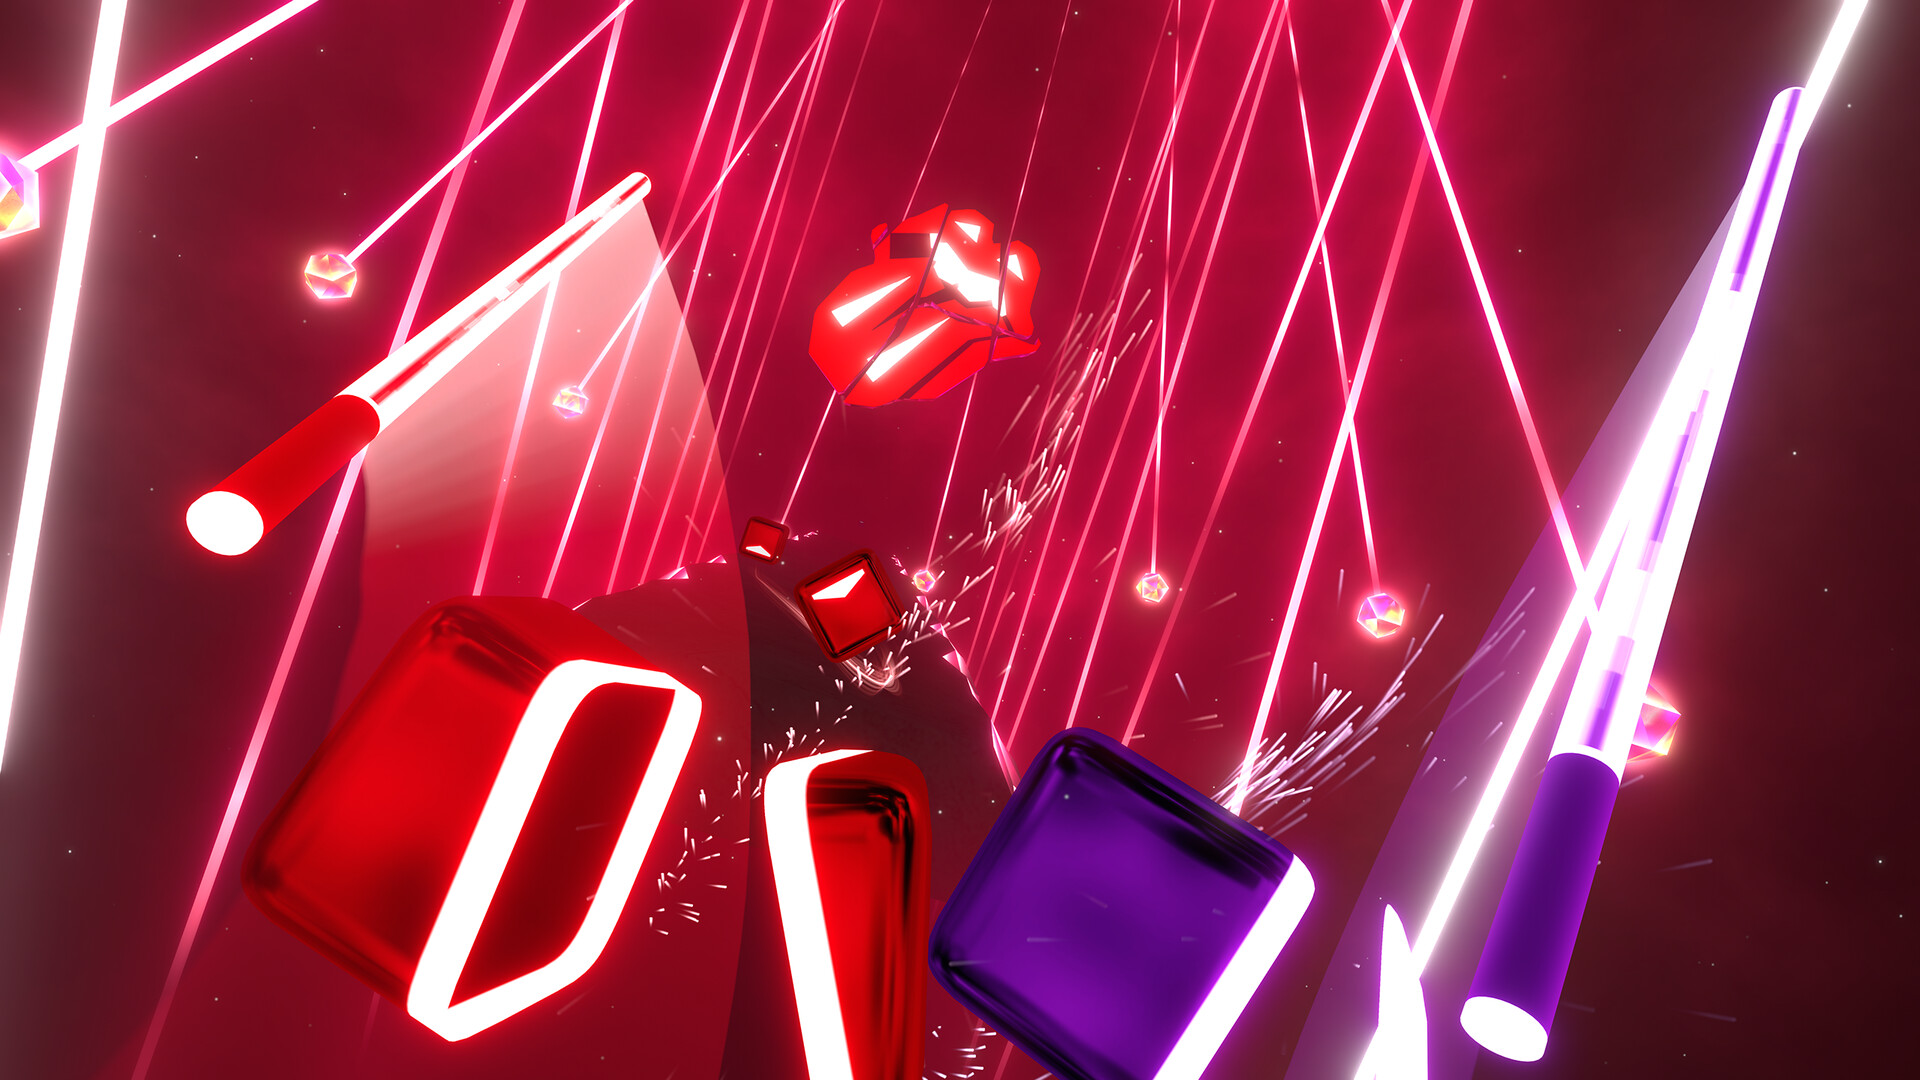 Beat Saber - The Rolling Stones - "Angry" Featured Screenshot #1